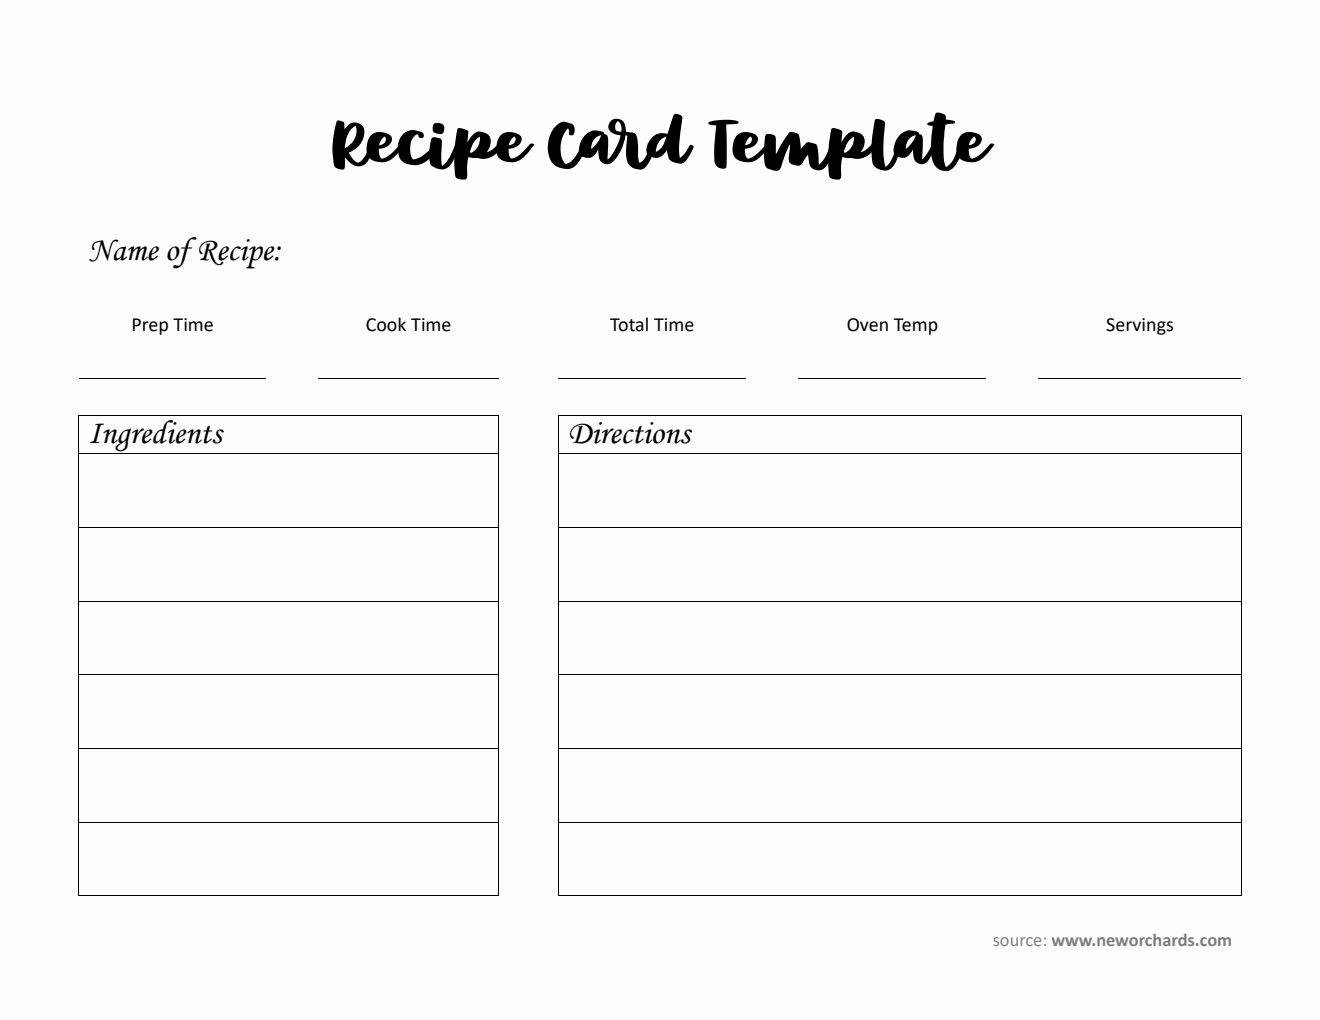 Free Recipe Card Template in Word Format